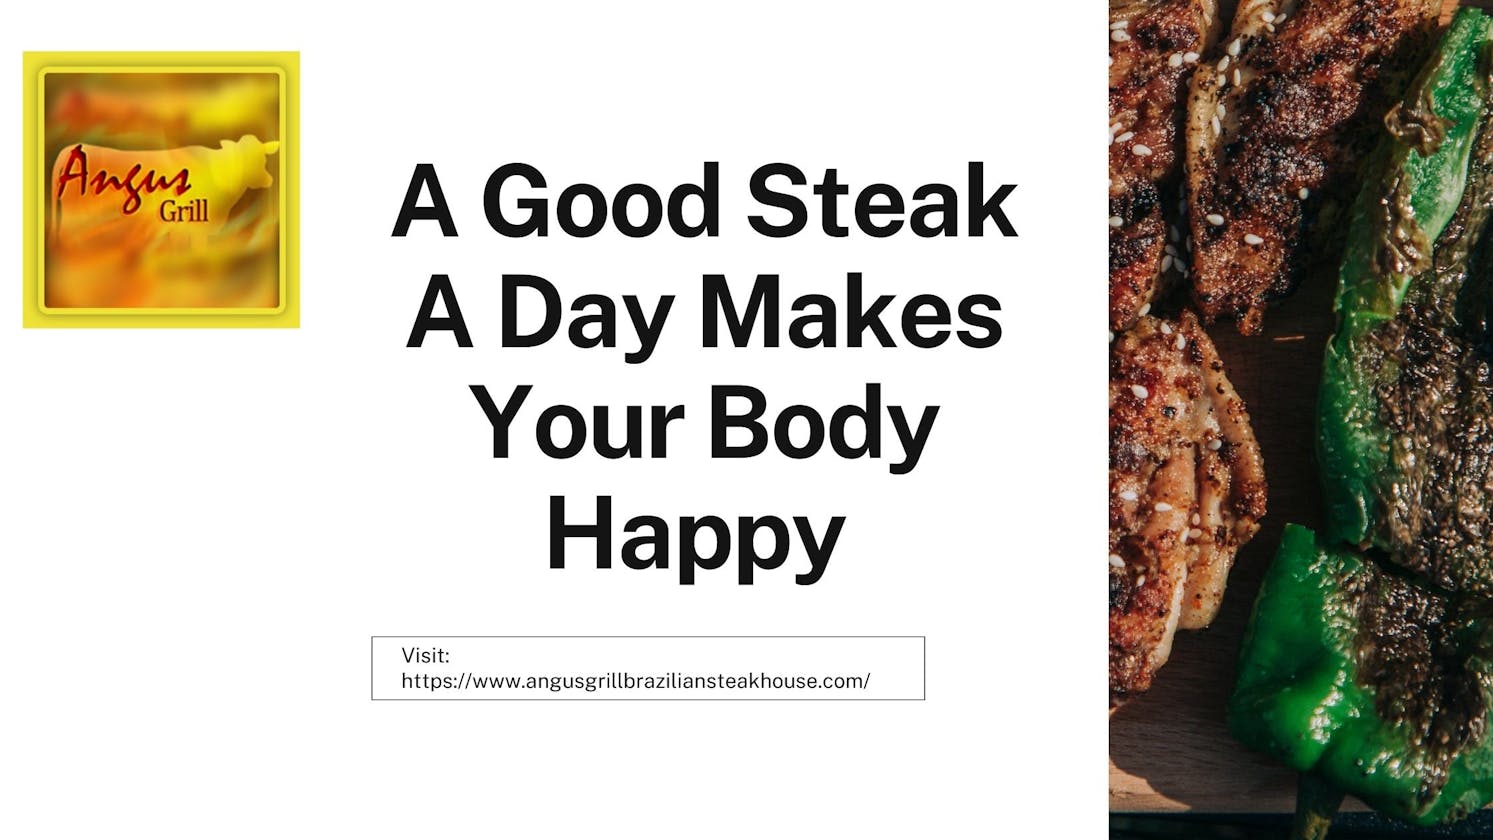 A Good Steak A Day Makes Your Body Happy